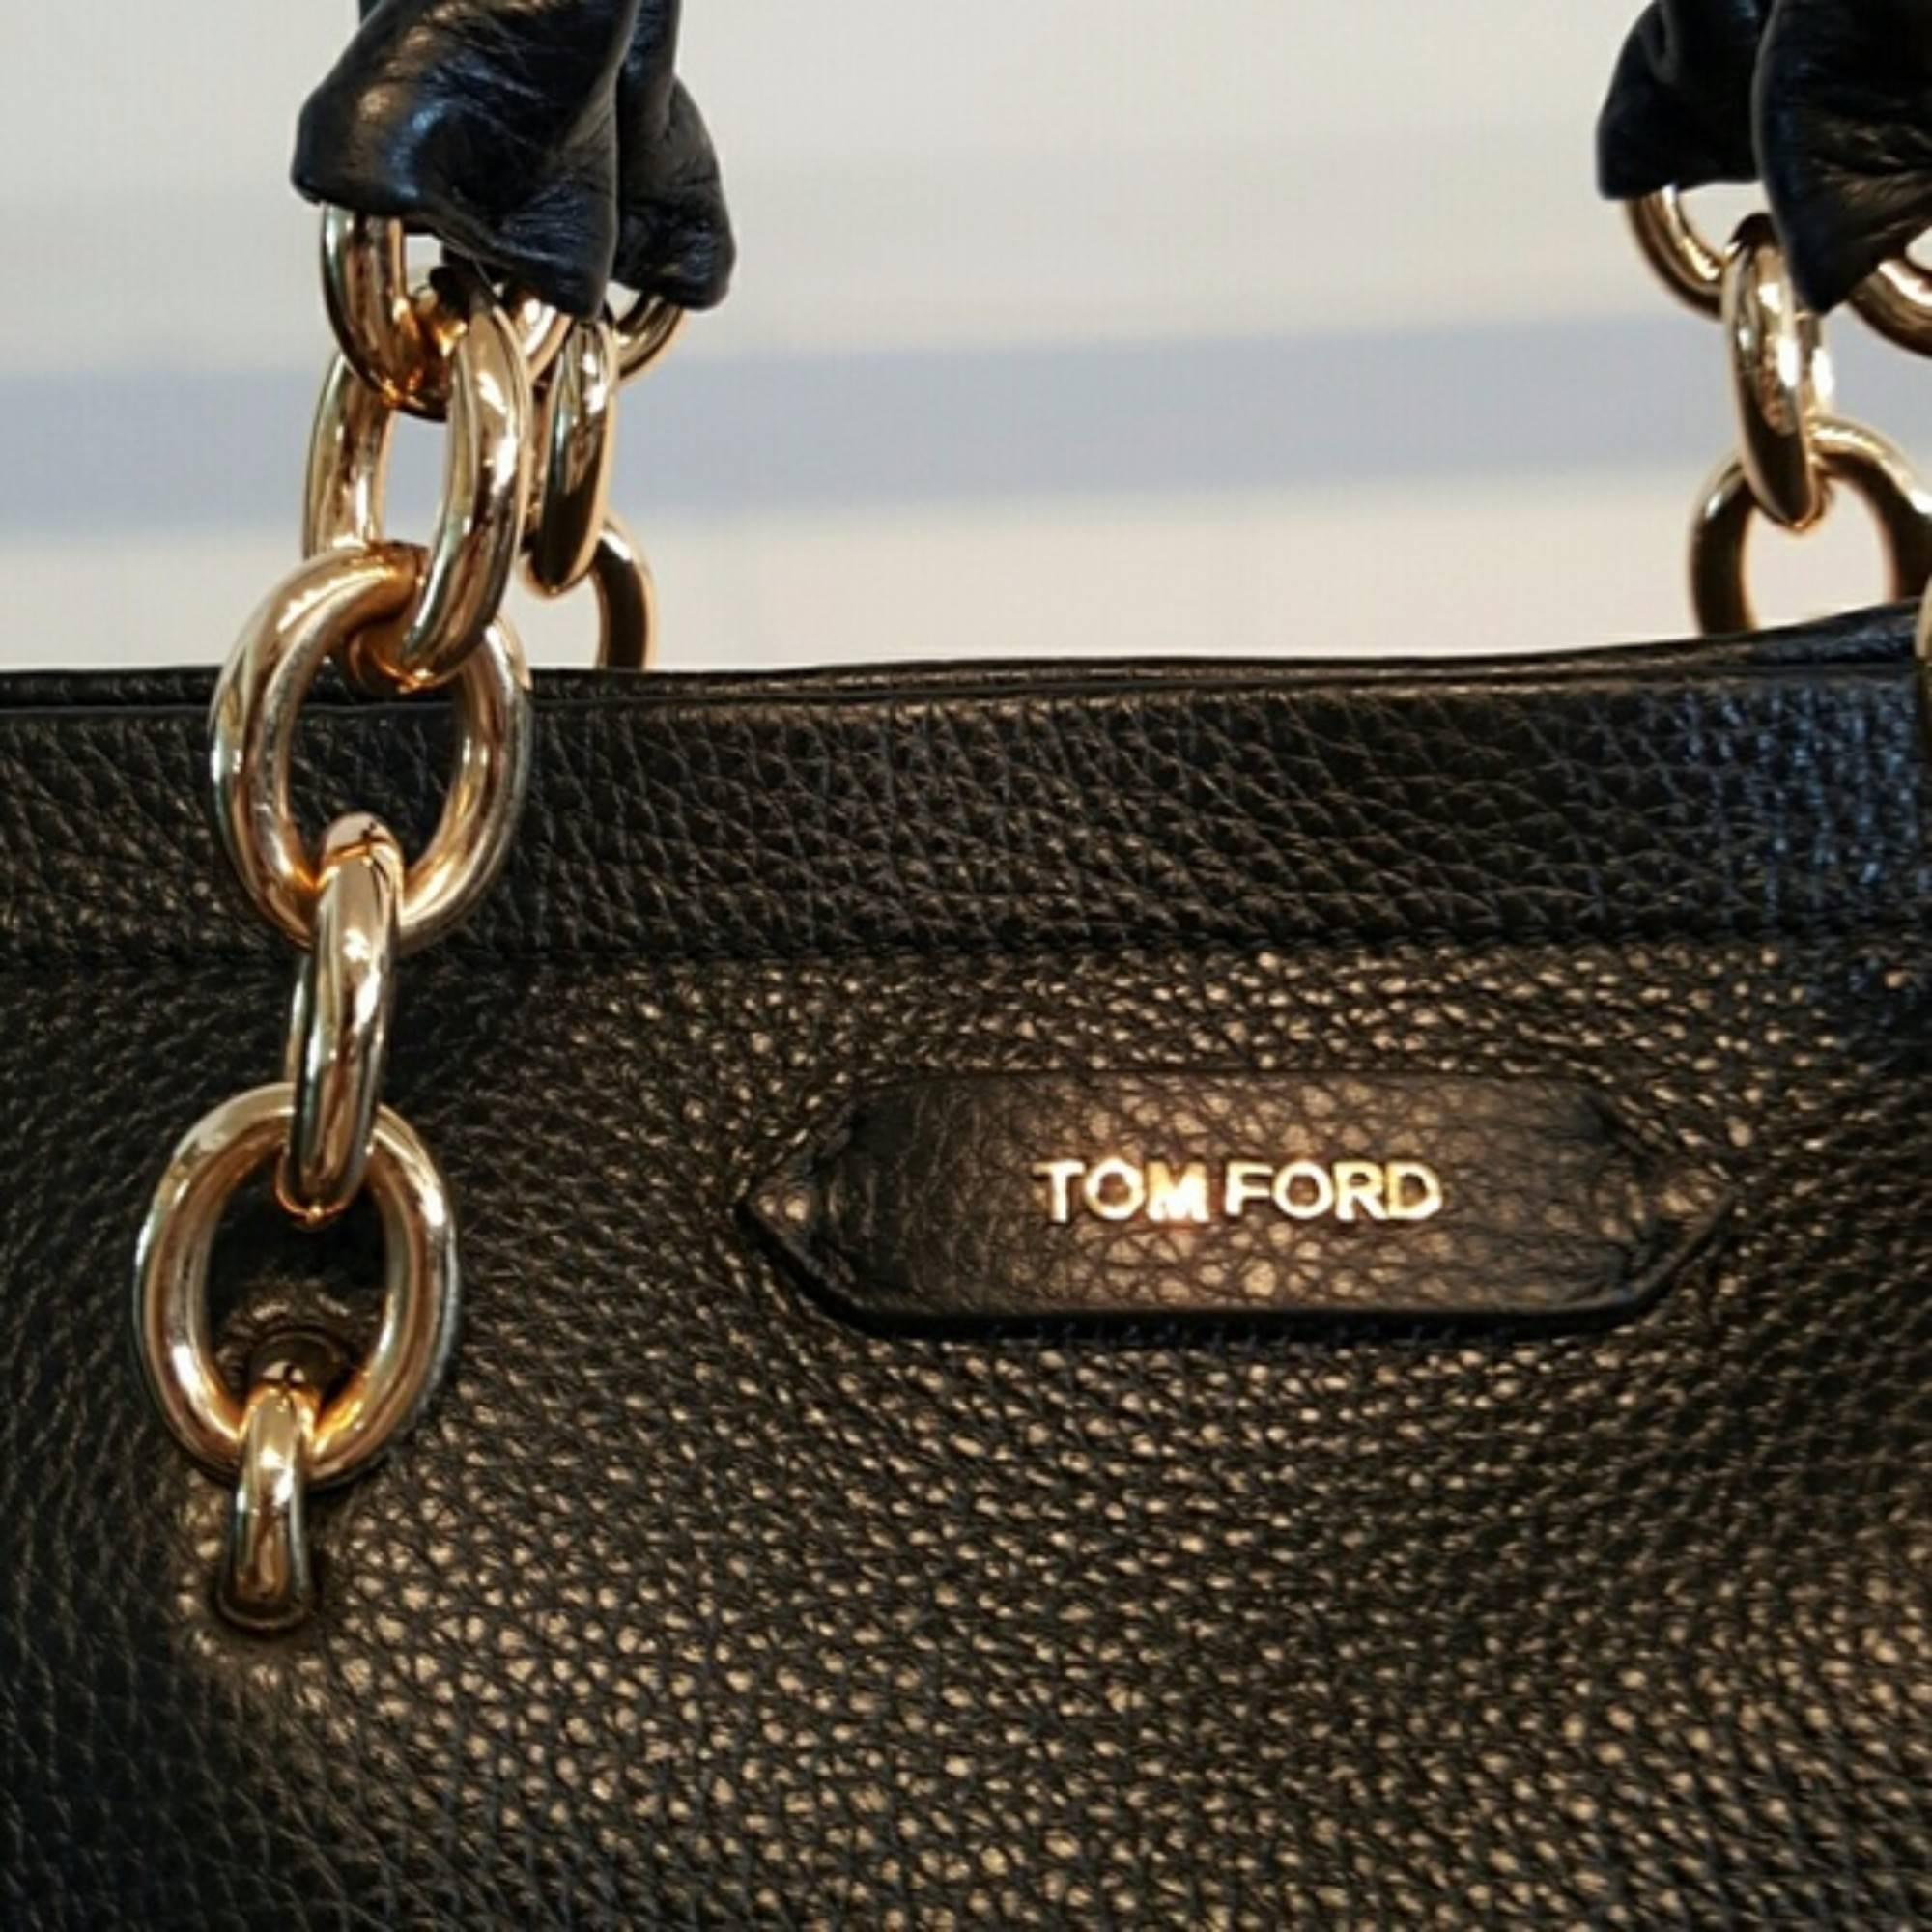 Tom Ford Leather Tote Bag (Black, Size - OS) In New Condition For Sale In Los Angeles, CA